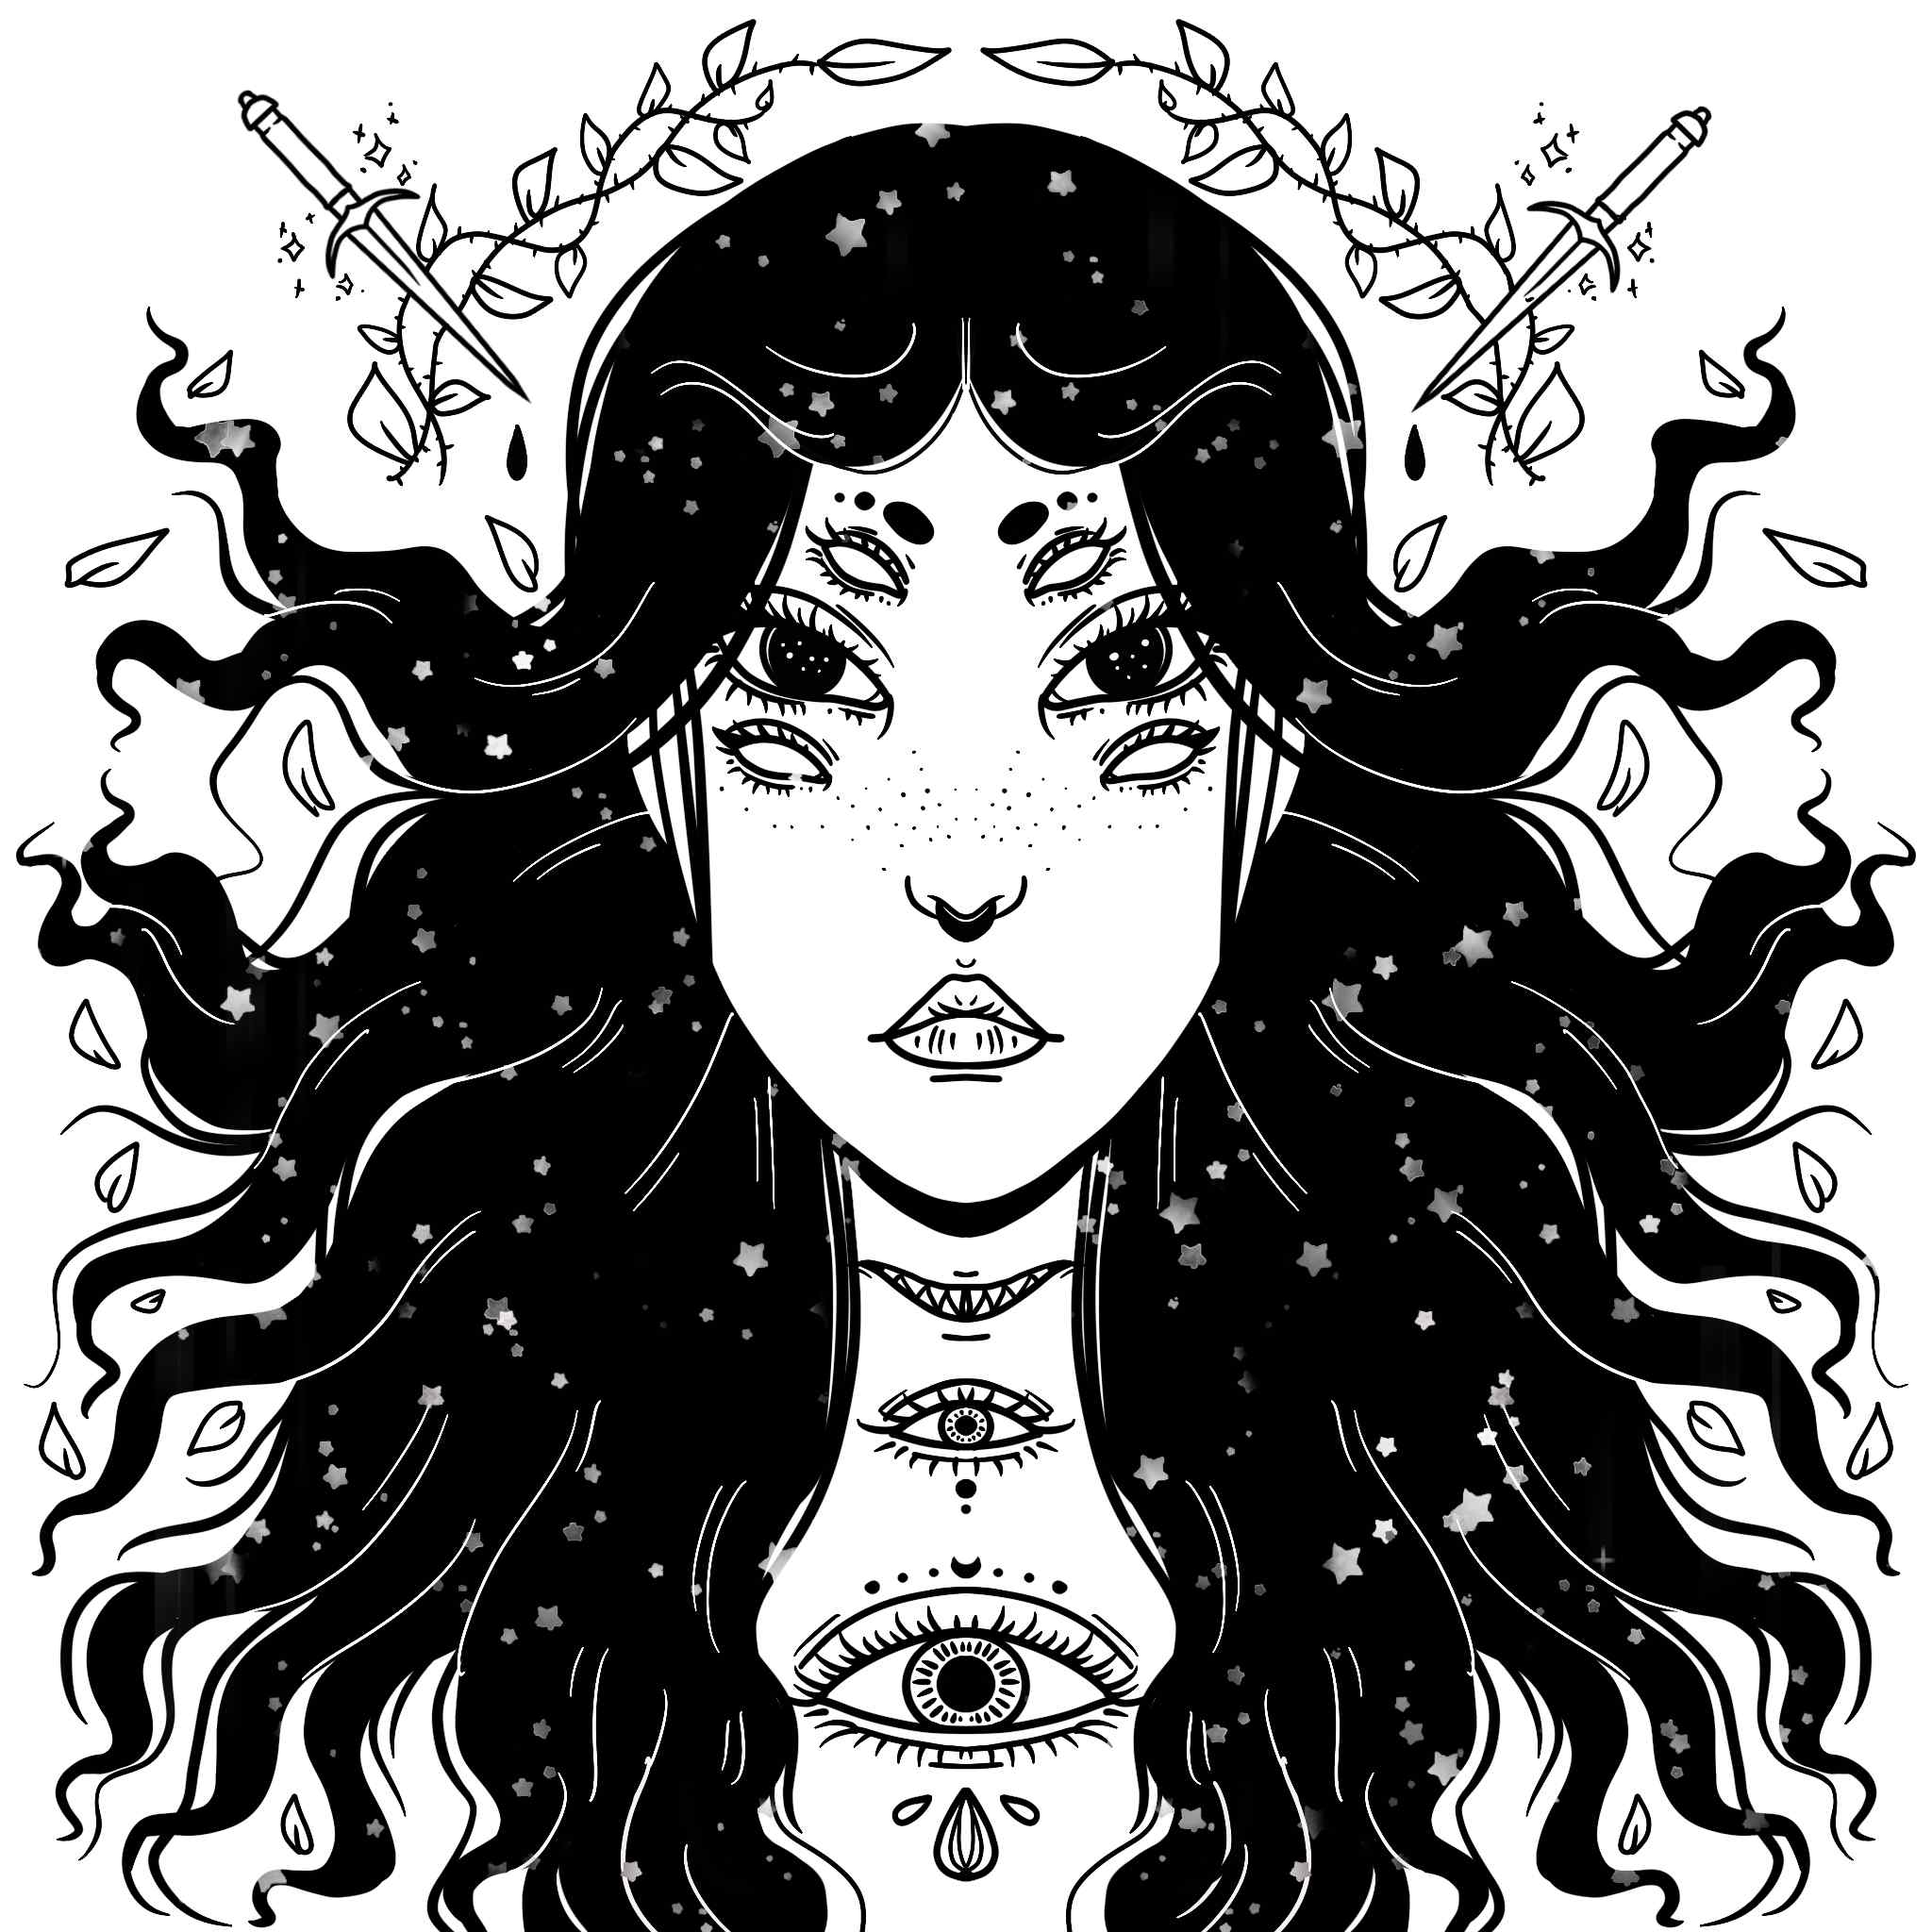 digital symmetrical ink drawing of a girl with black hair and 6 eyes. There are eyes and a mouth with teeth bared on her neck, and swords above her head.